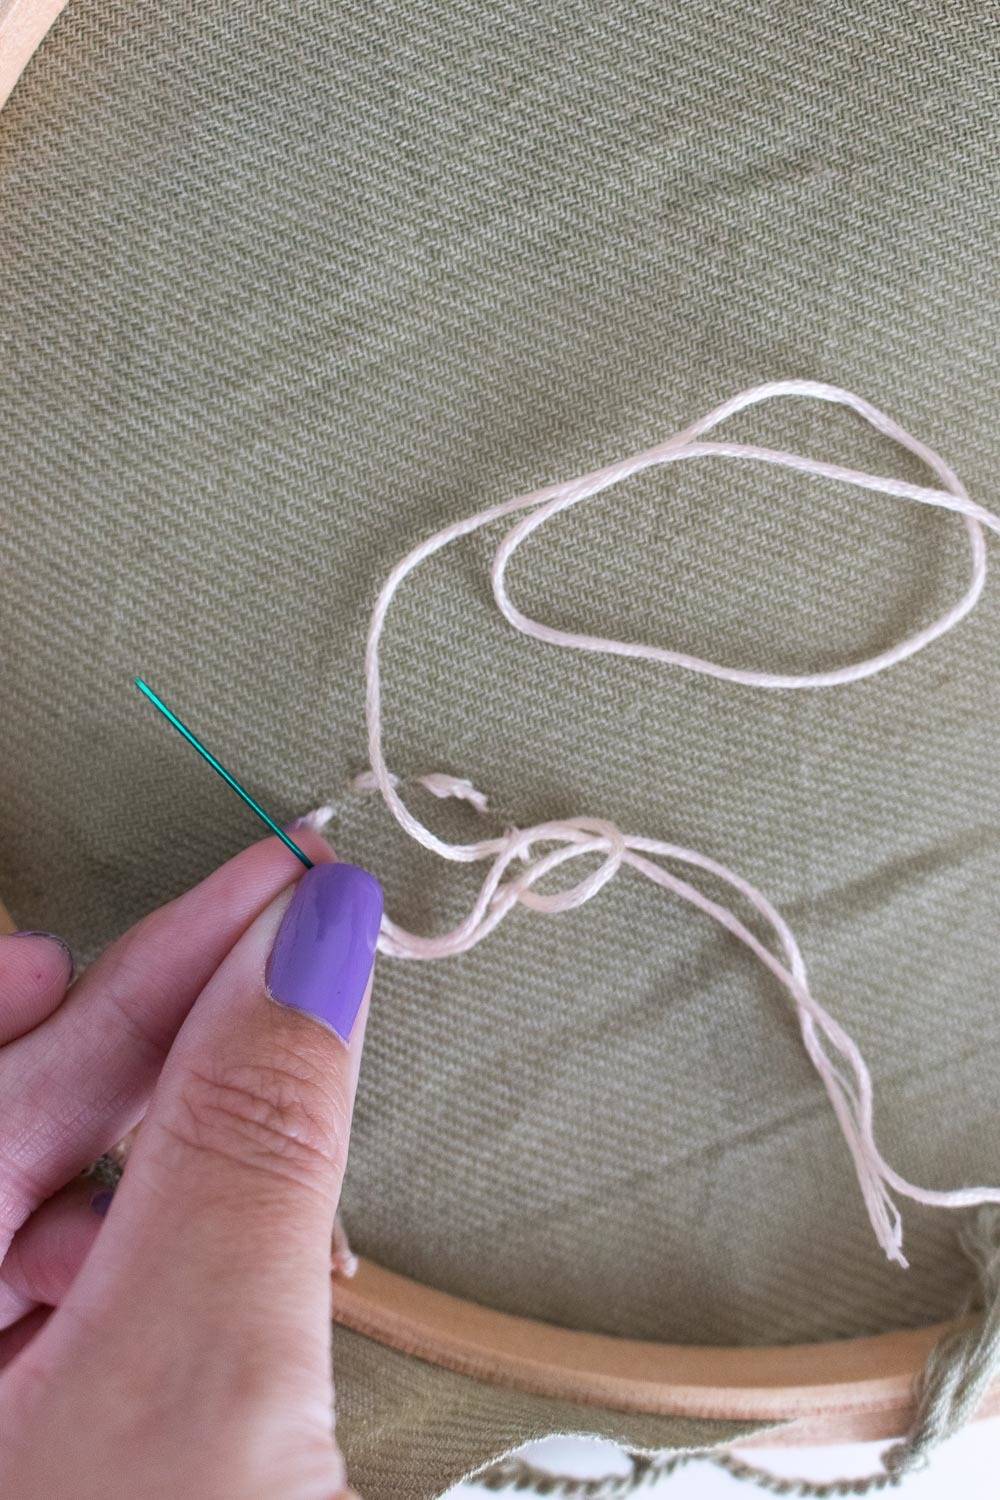 A person with purple fingernails is working with string.